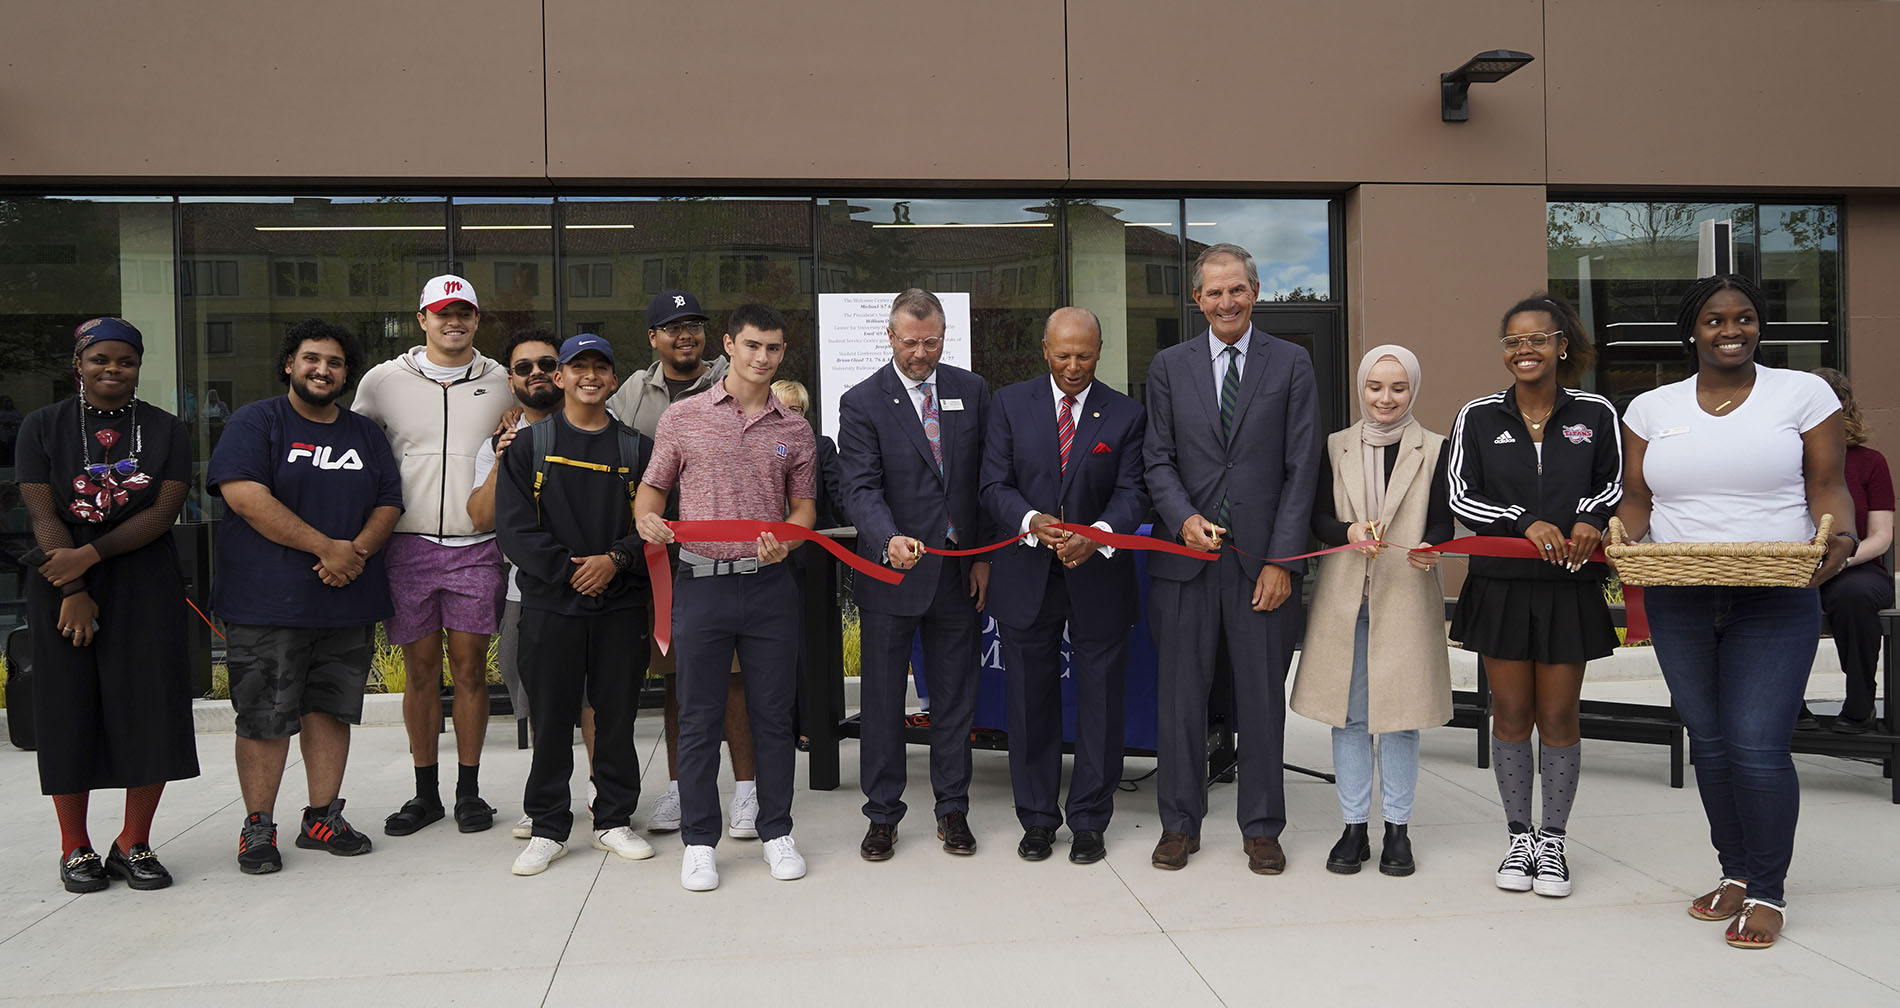 Students and administrators participate in a ceremonial ribbon cutting for the new Student Union.